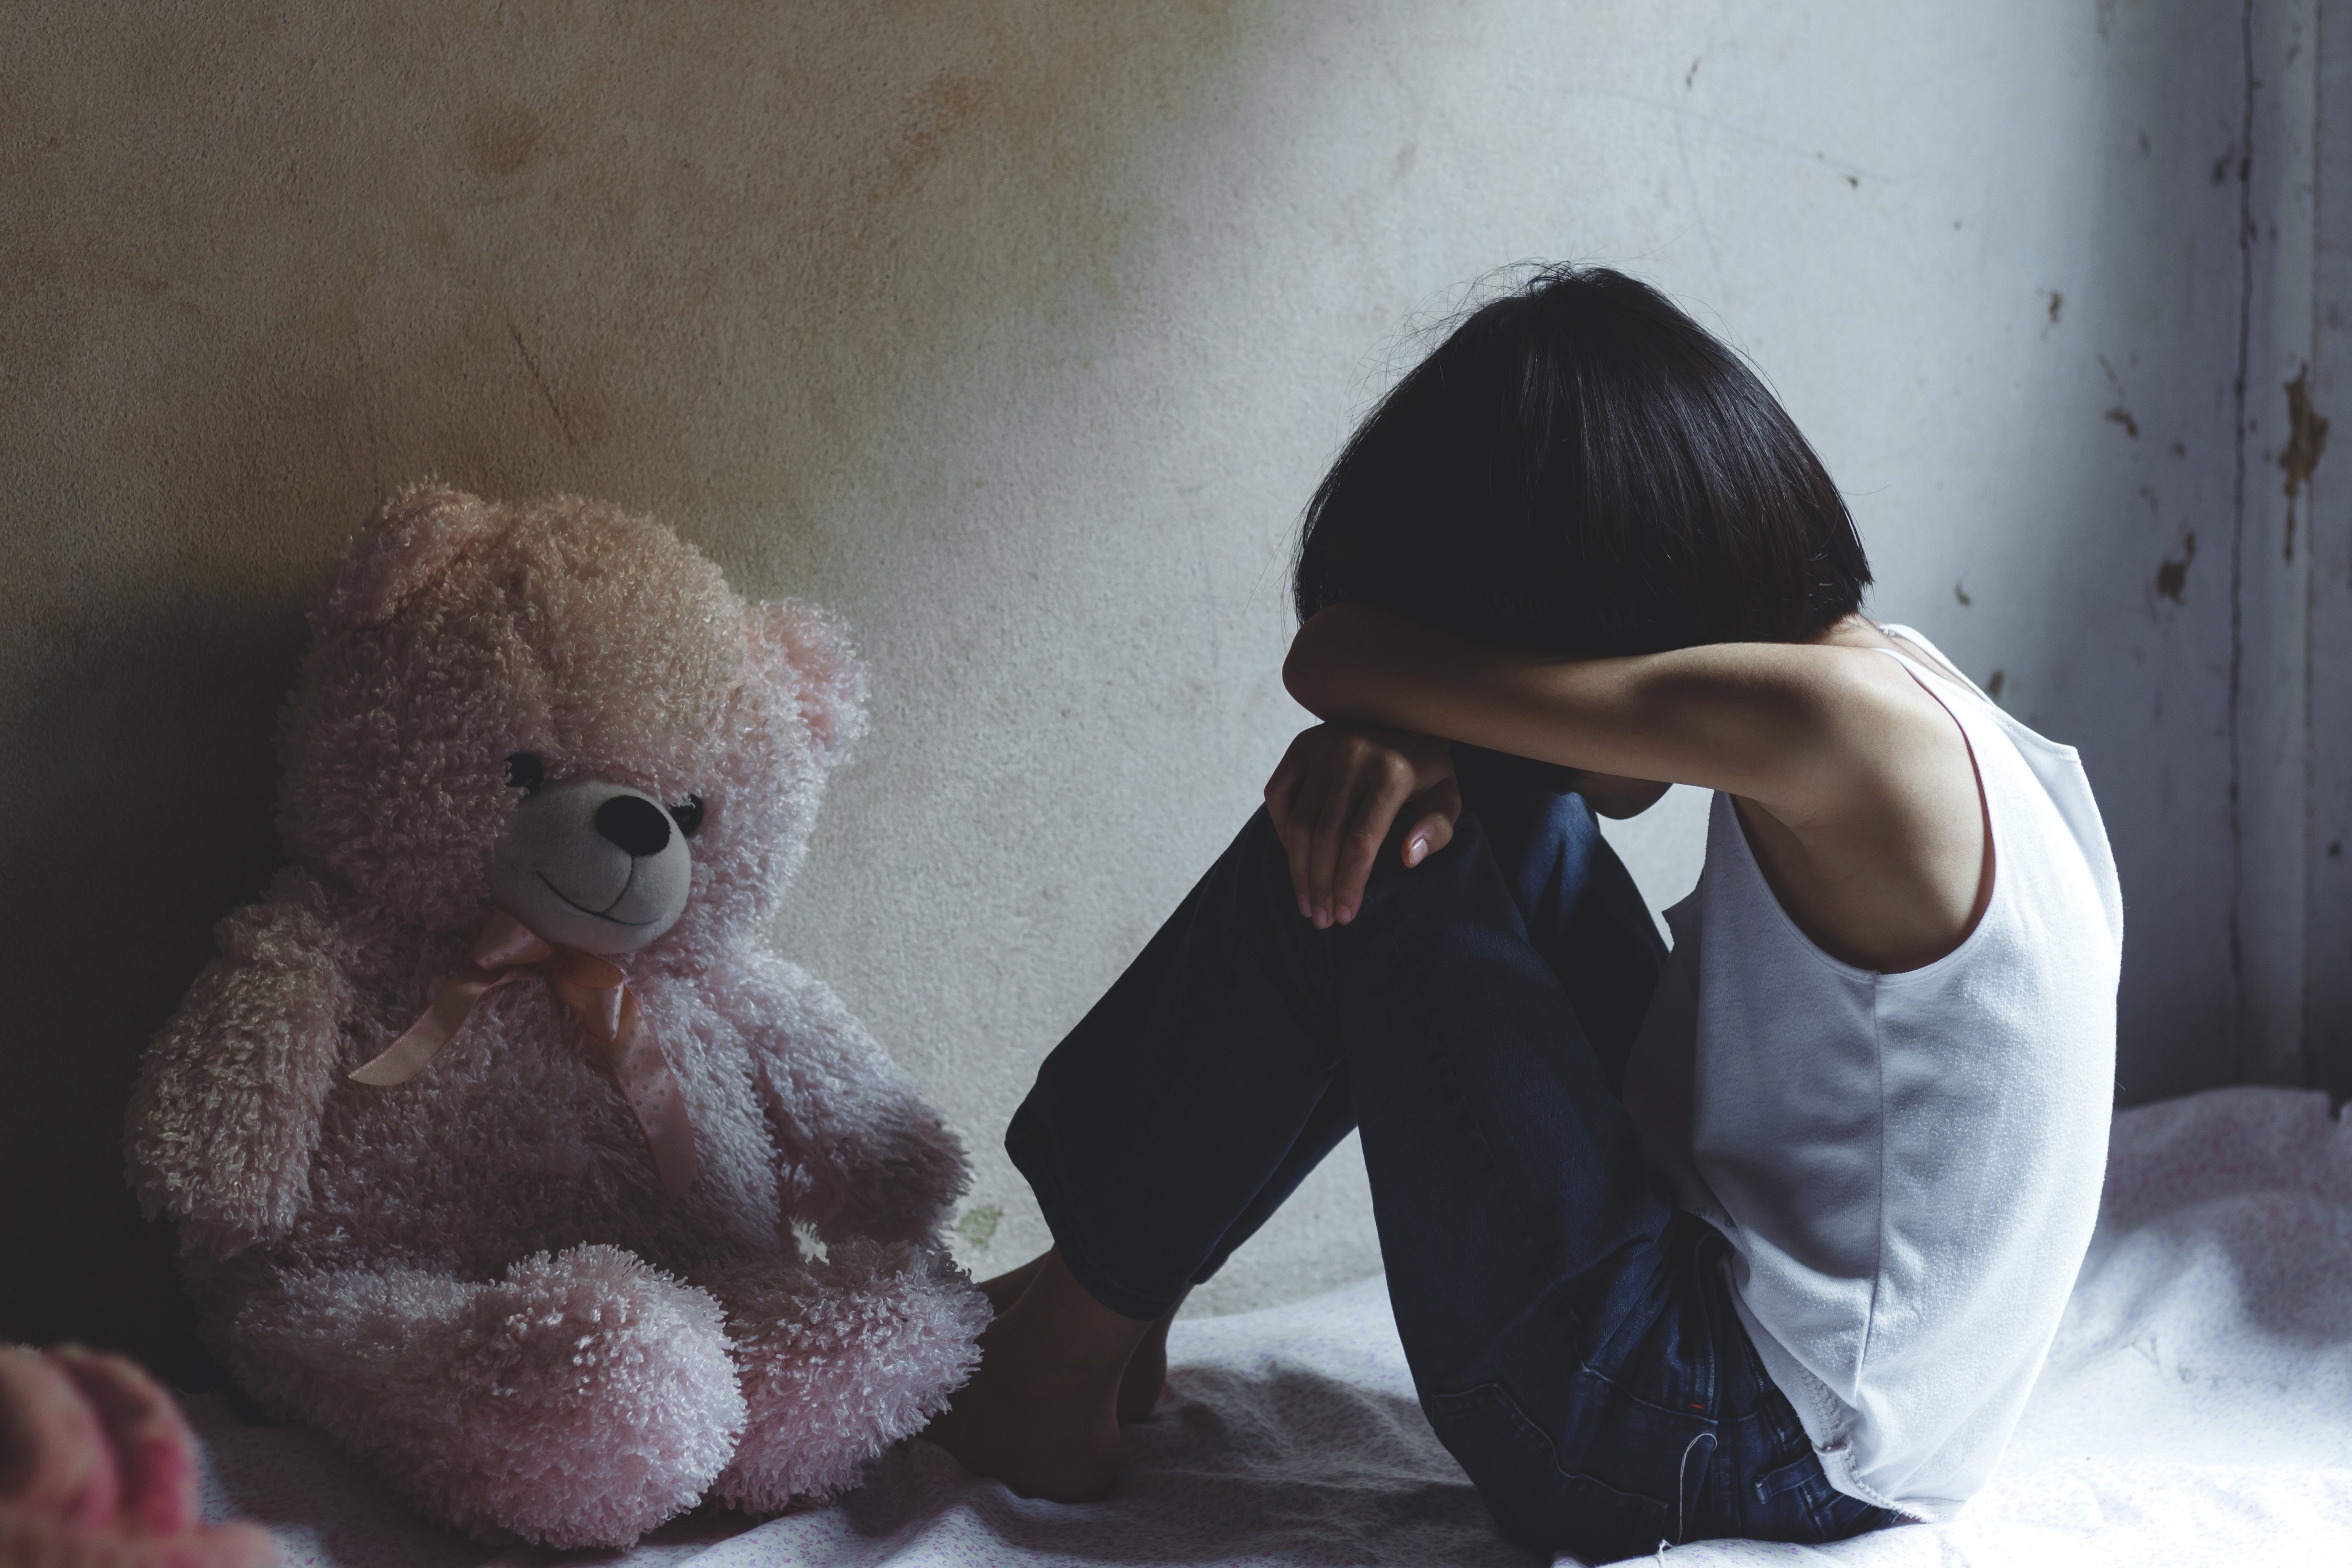 If child abuse is properly addressed, it will also be a positive investment in the future. Photo: Shutterstock